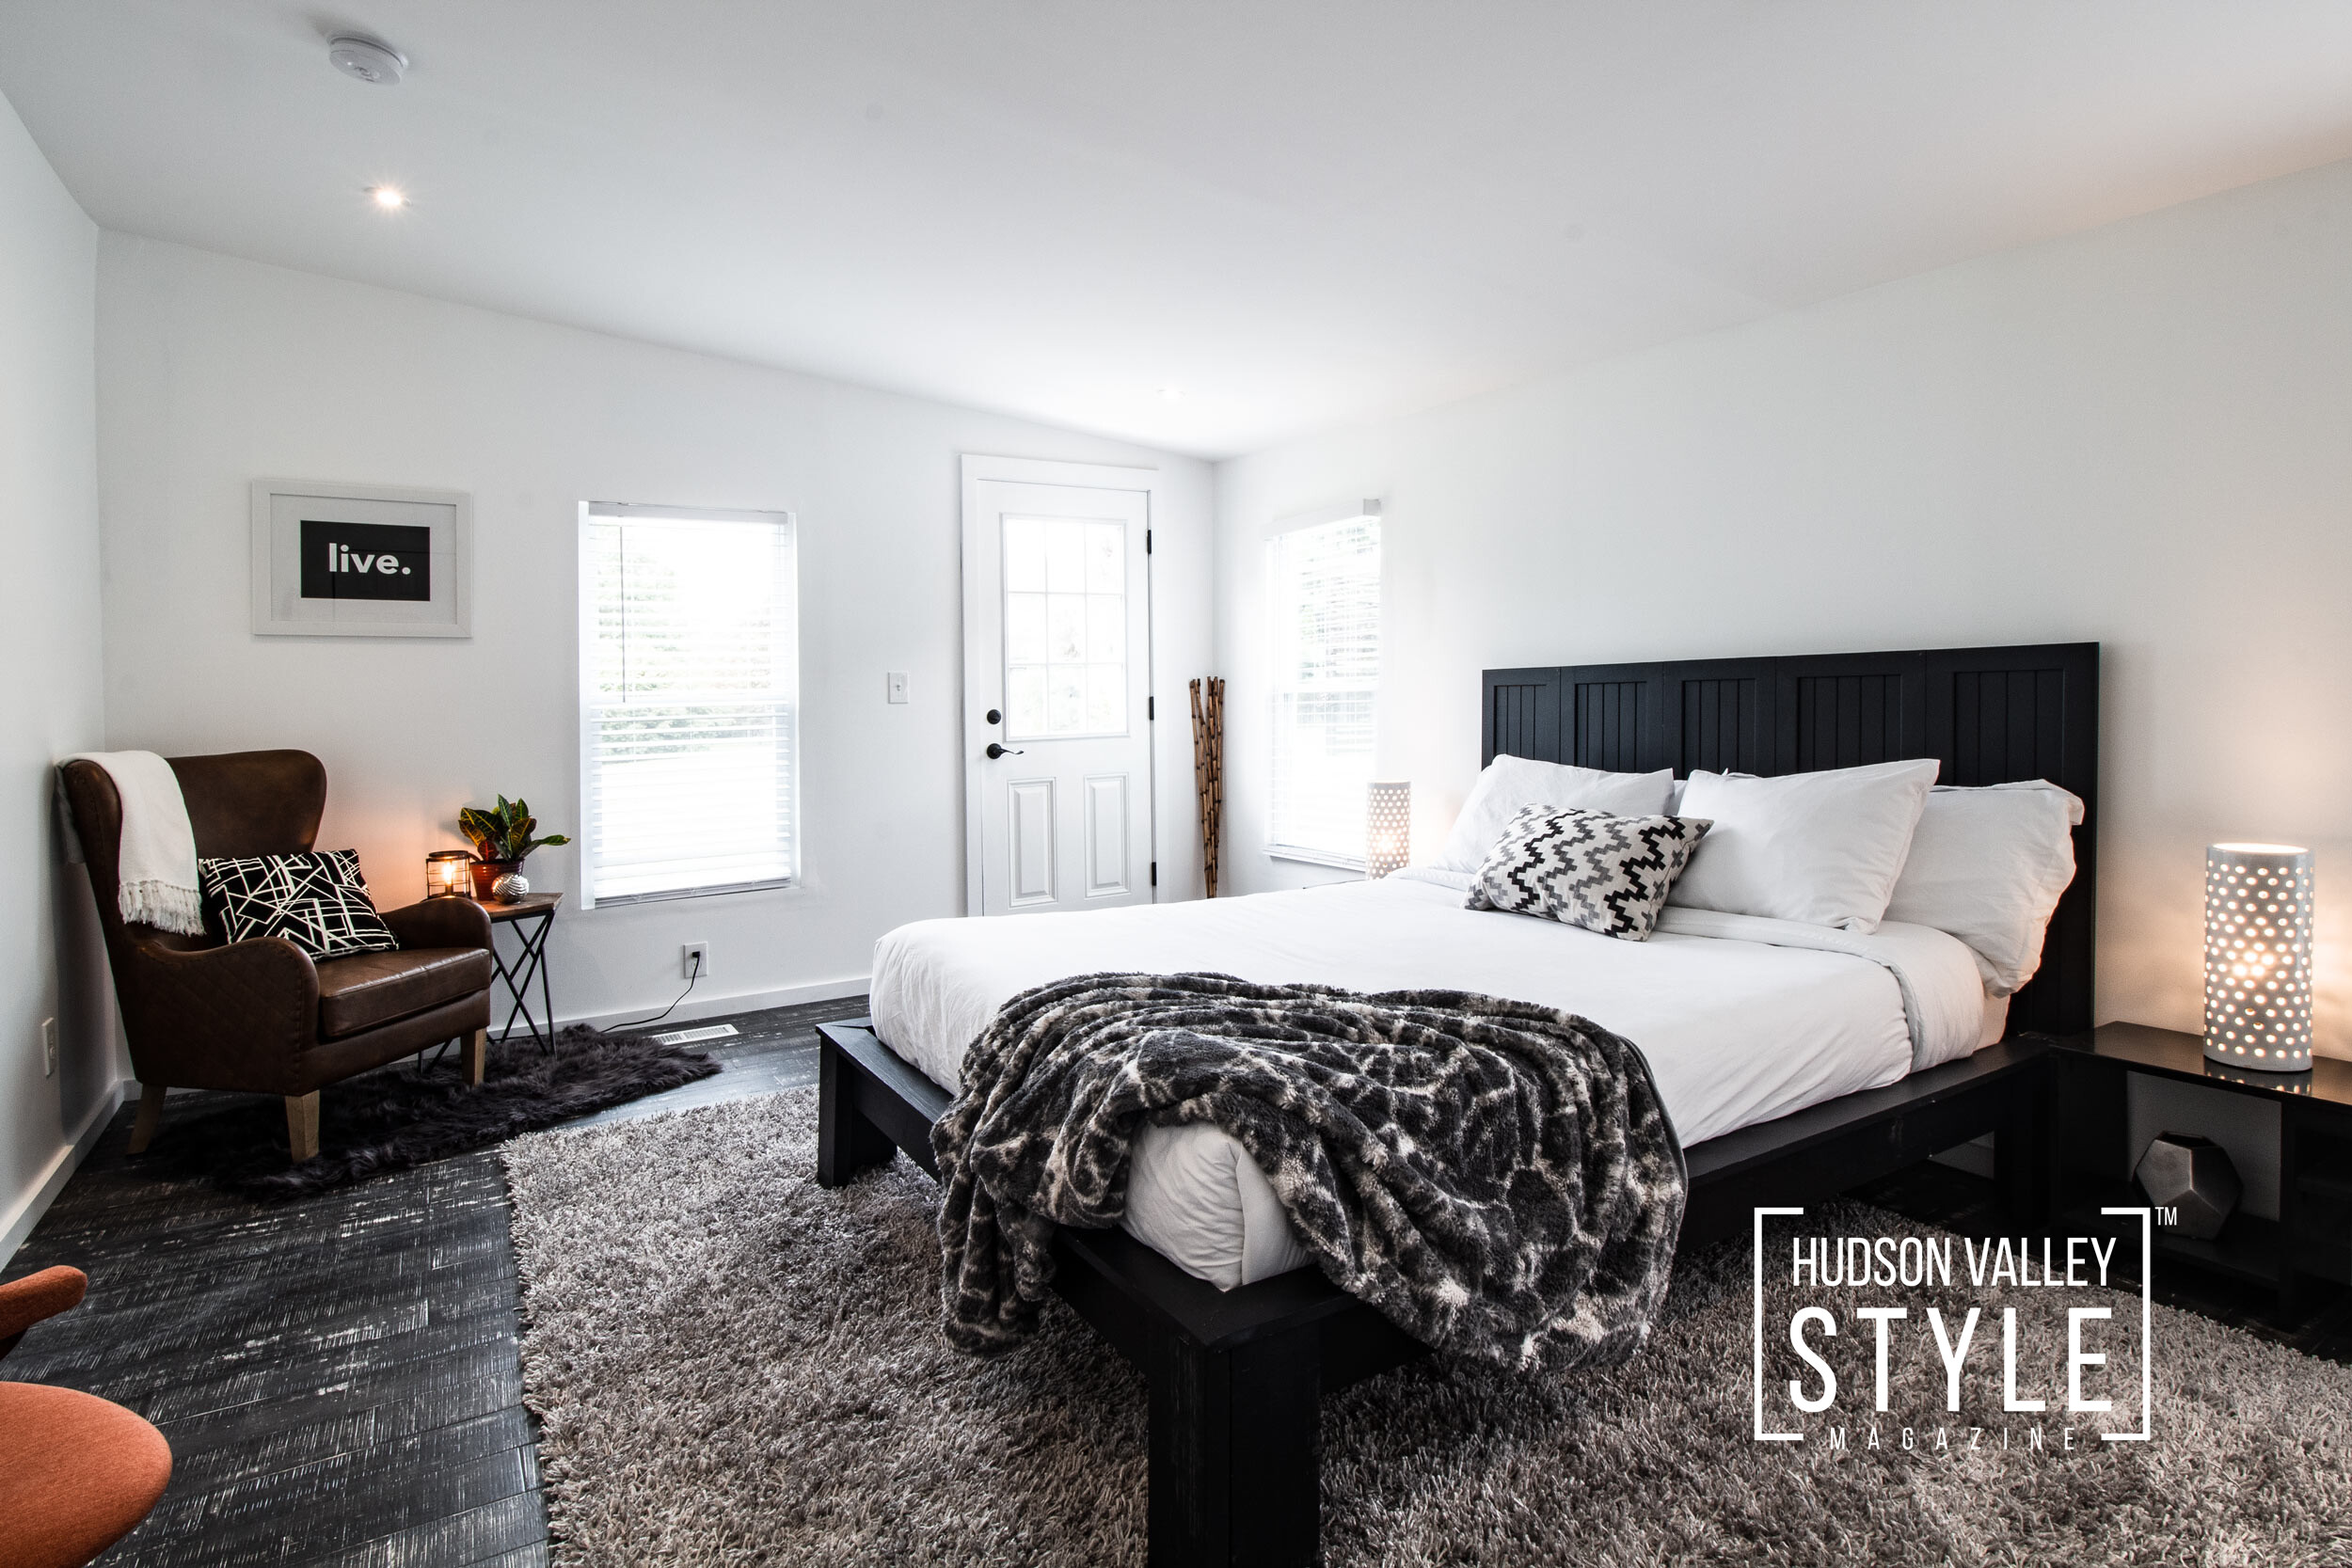 How to Choose the Best Real Estate Photographer for Your House Listing in the Hudson Valley – Presented by Duncan Avenue Studios